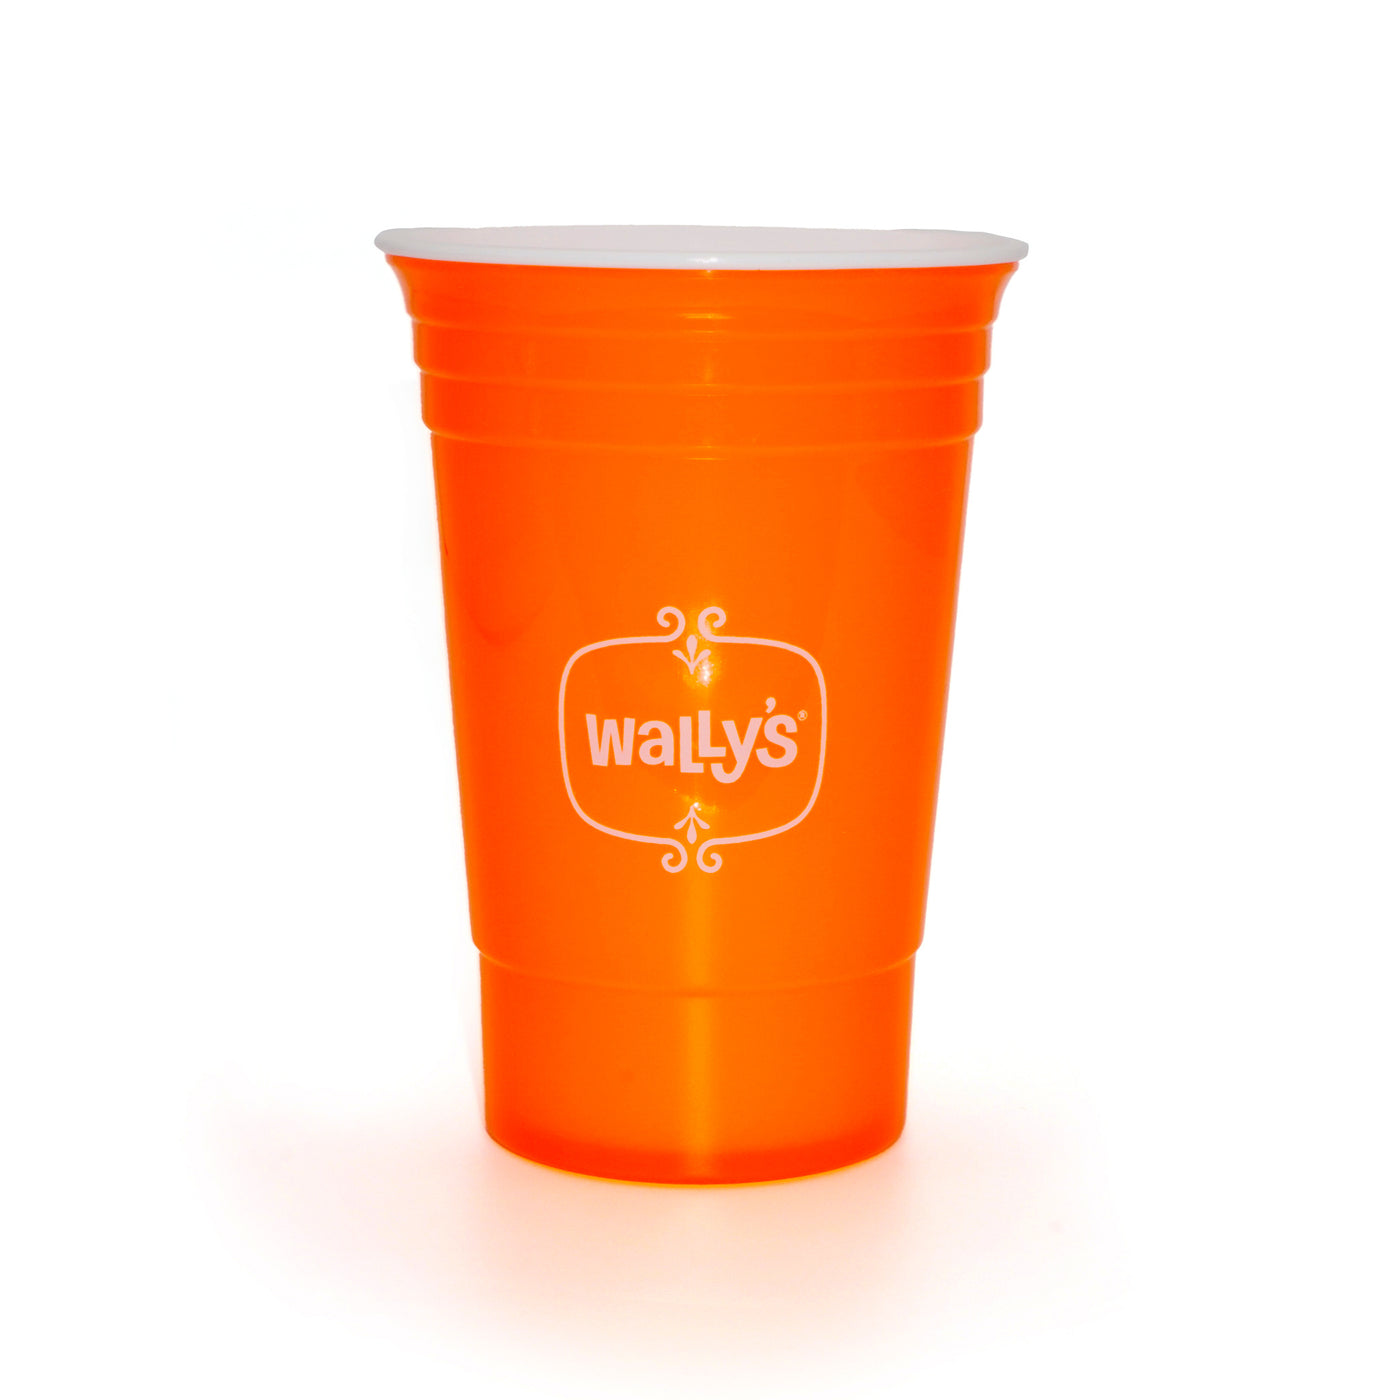 Hall of Fame Party Cup